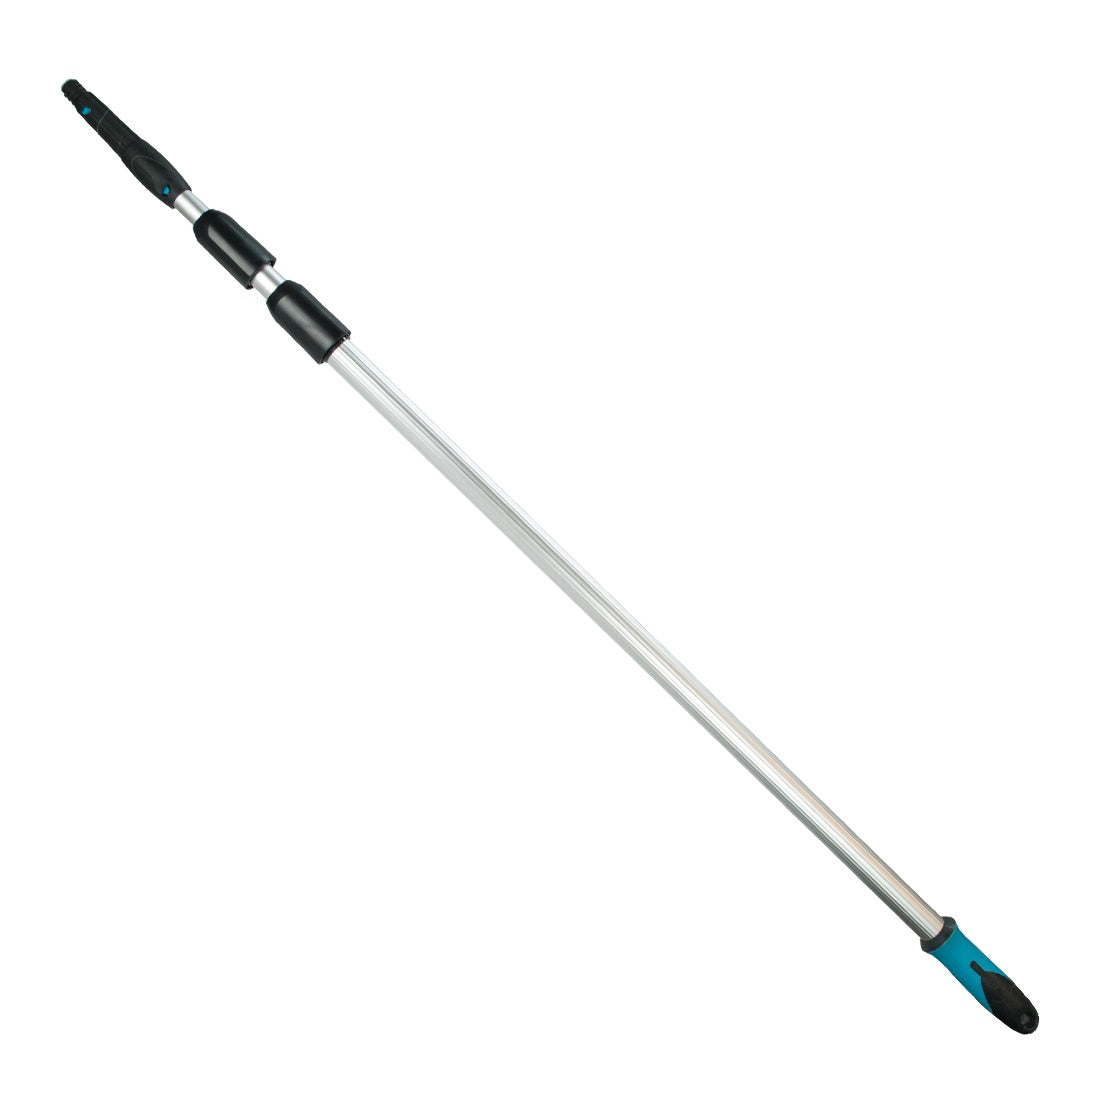 7 meters telescopic pole, 7 meters telescopic pole Suppliers and